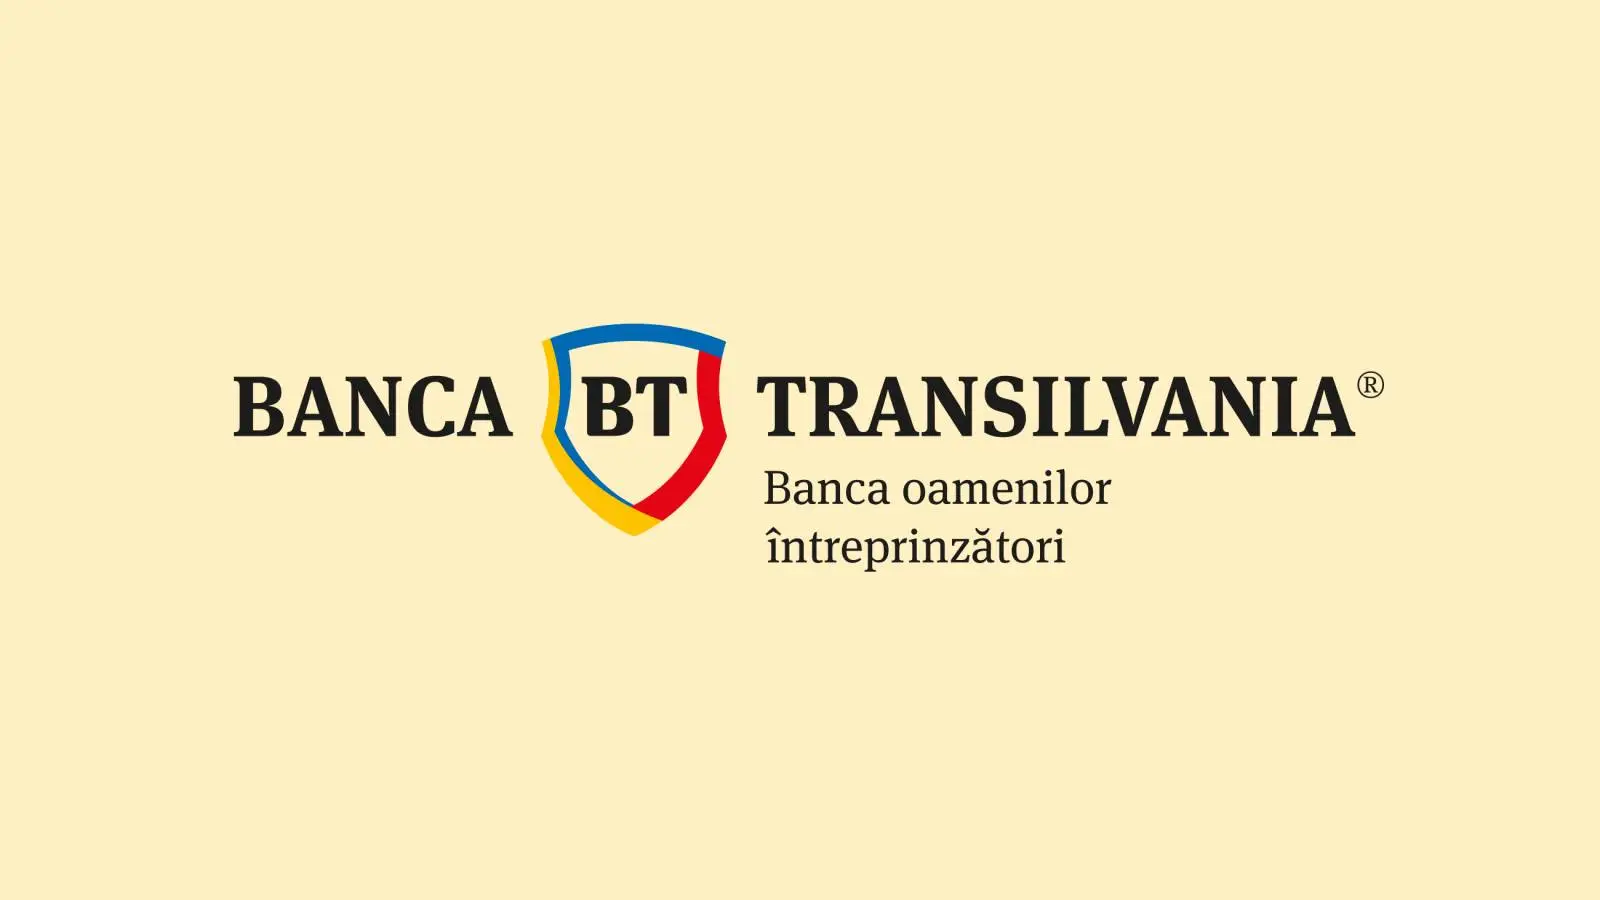 Important Announcement of BANCA Transilvania FREE to Romanian Customers